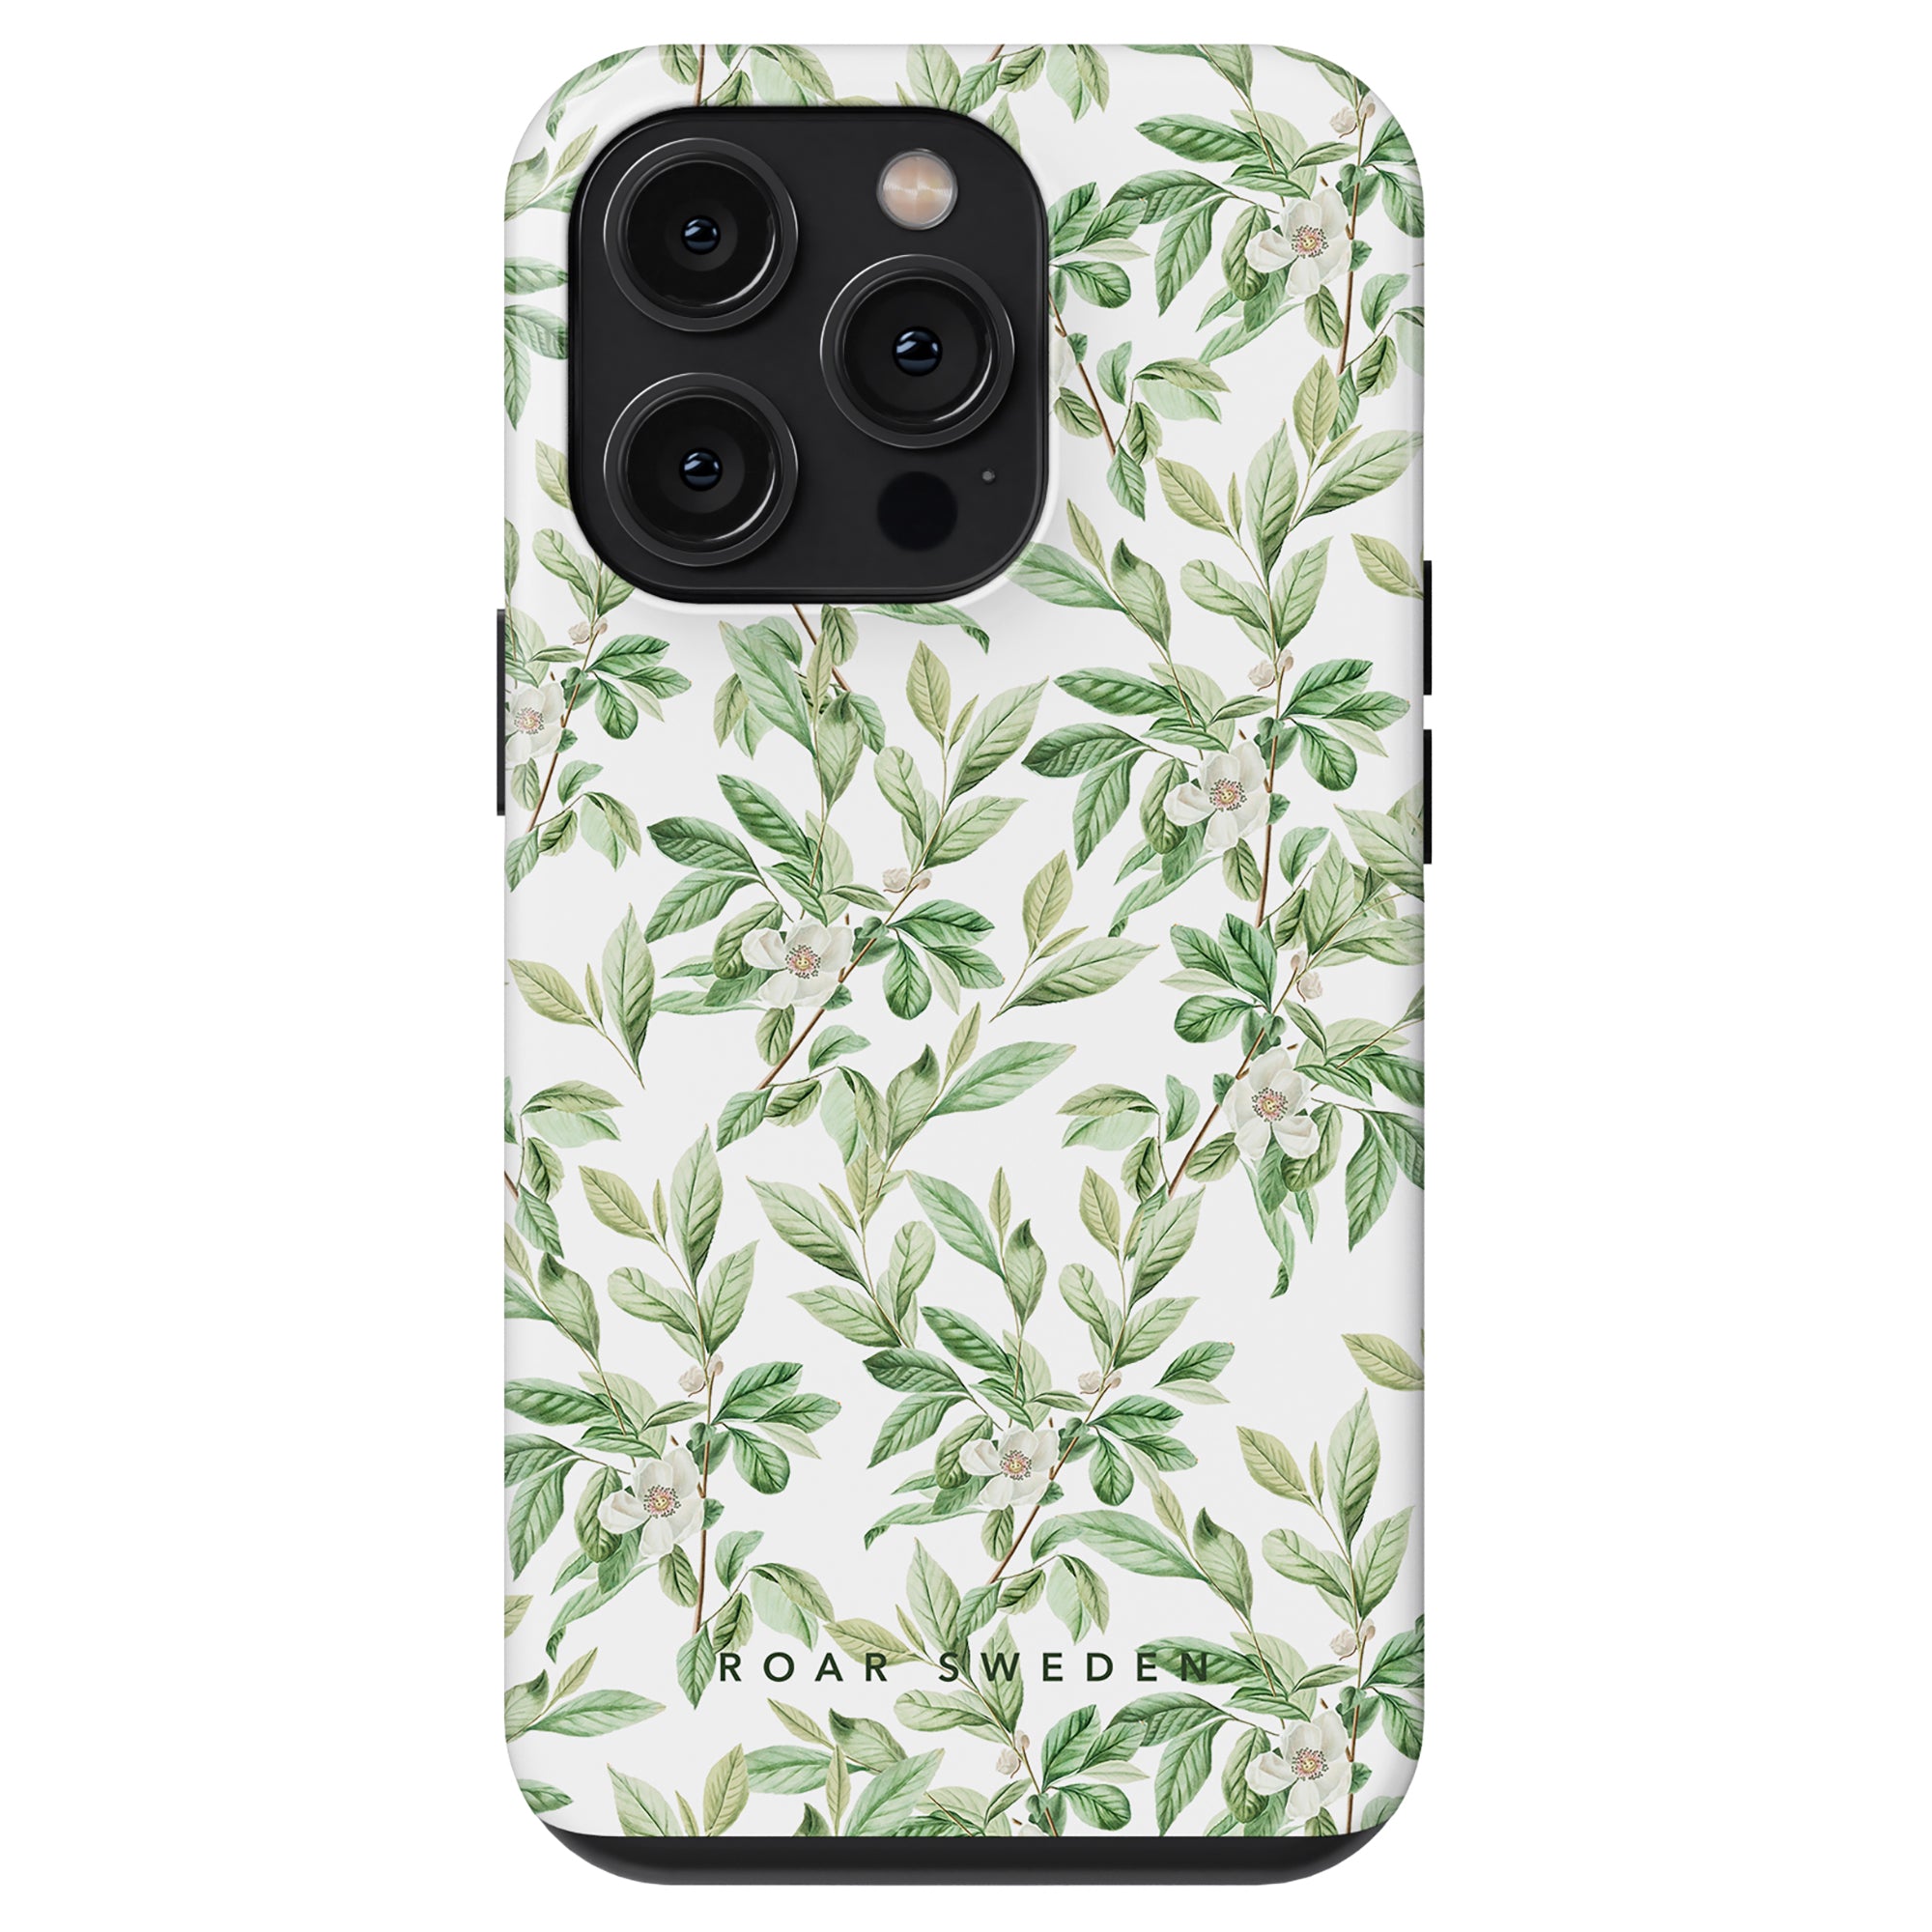 Smartphone with Spring Leaves - Tough Case and triple camera system.